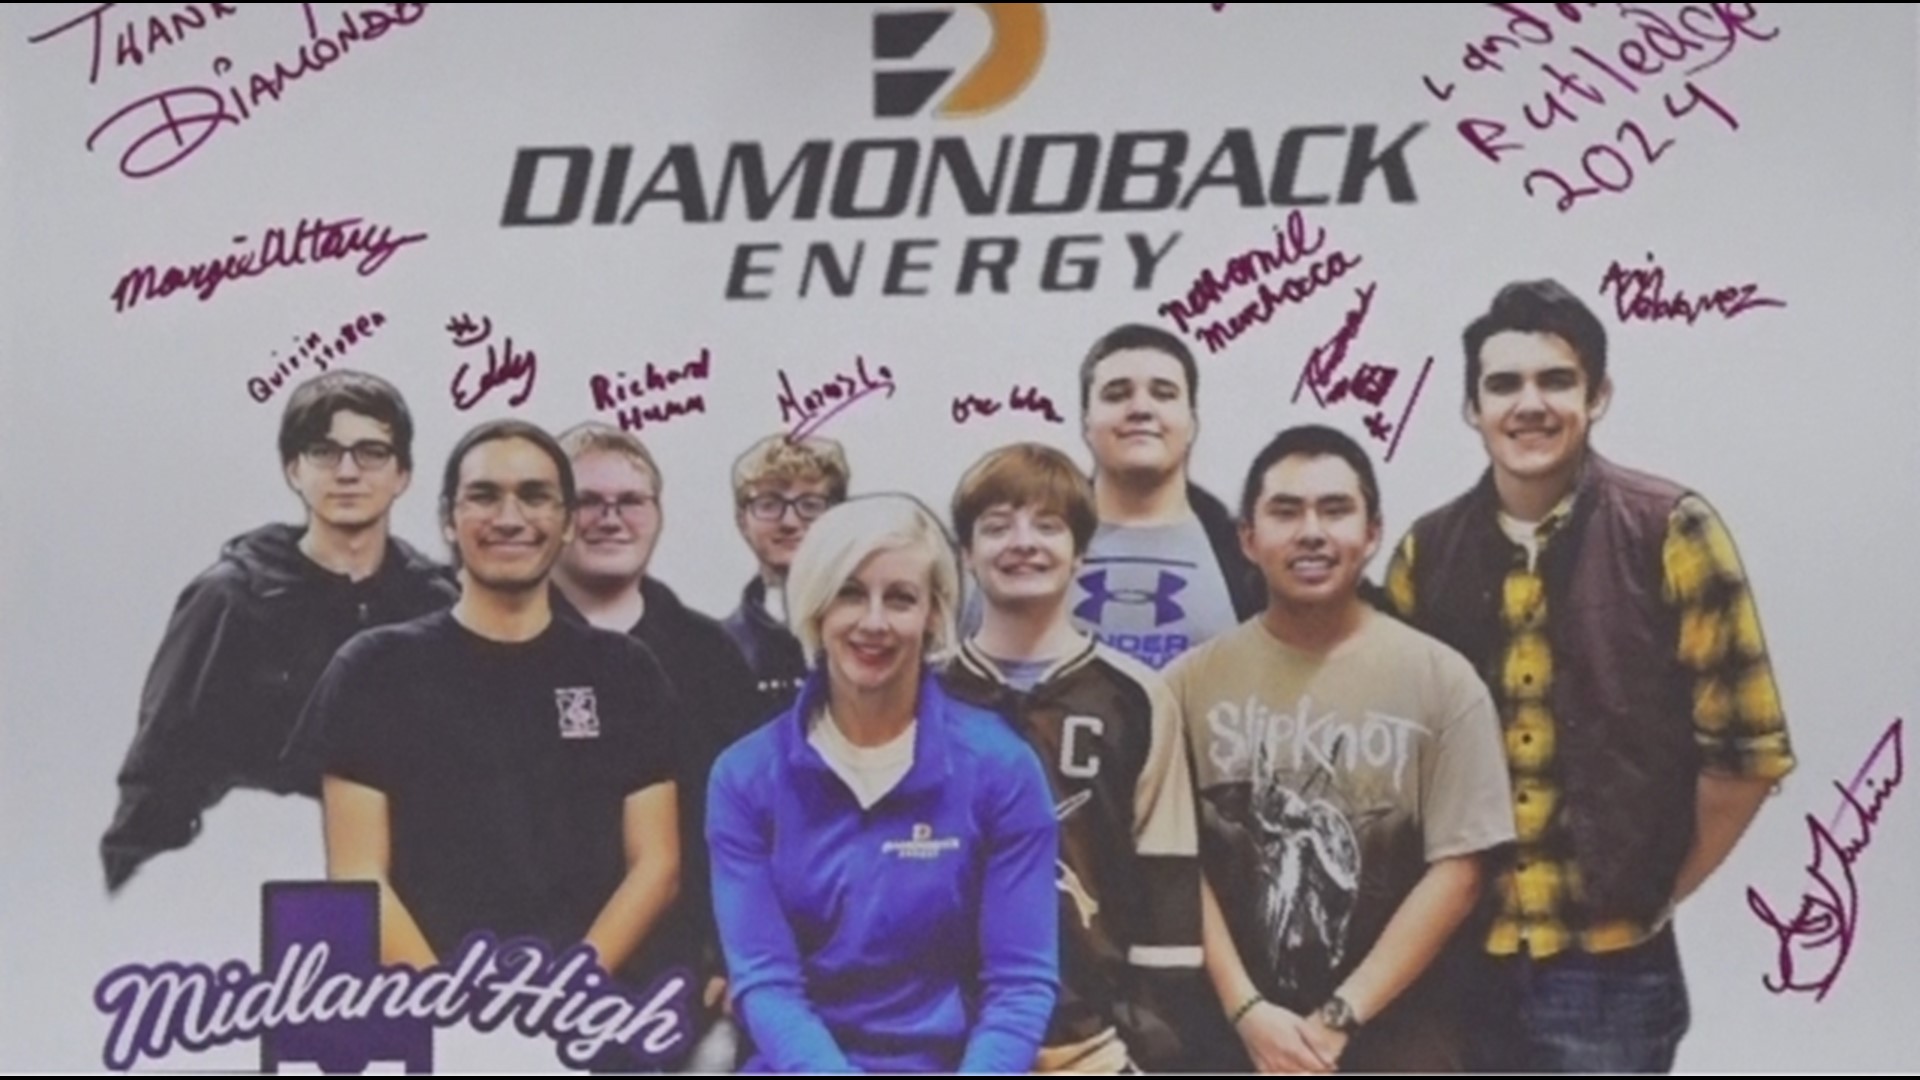 The program has done so well in its early years that Diamondback hopes to expand to more schools in MISD and to involve students in STEM at a younger age.